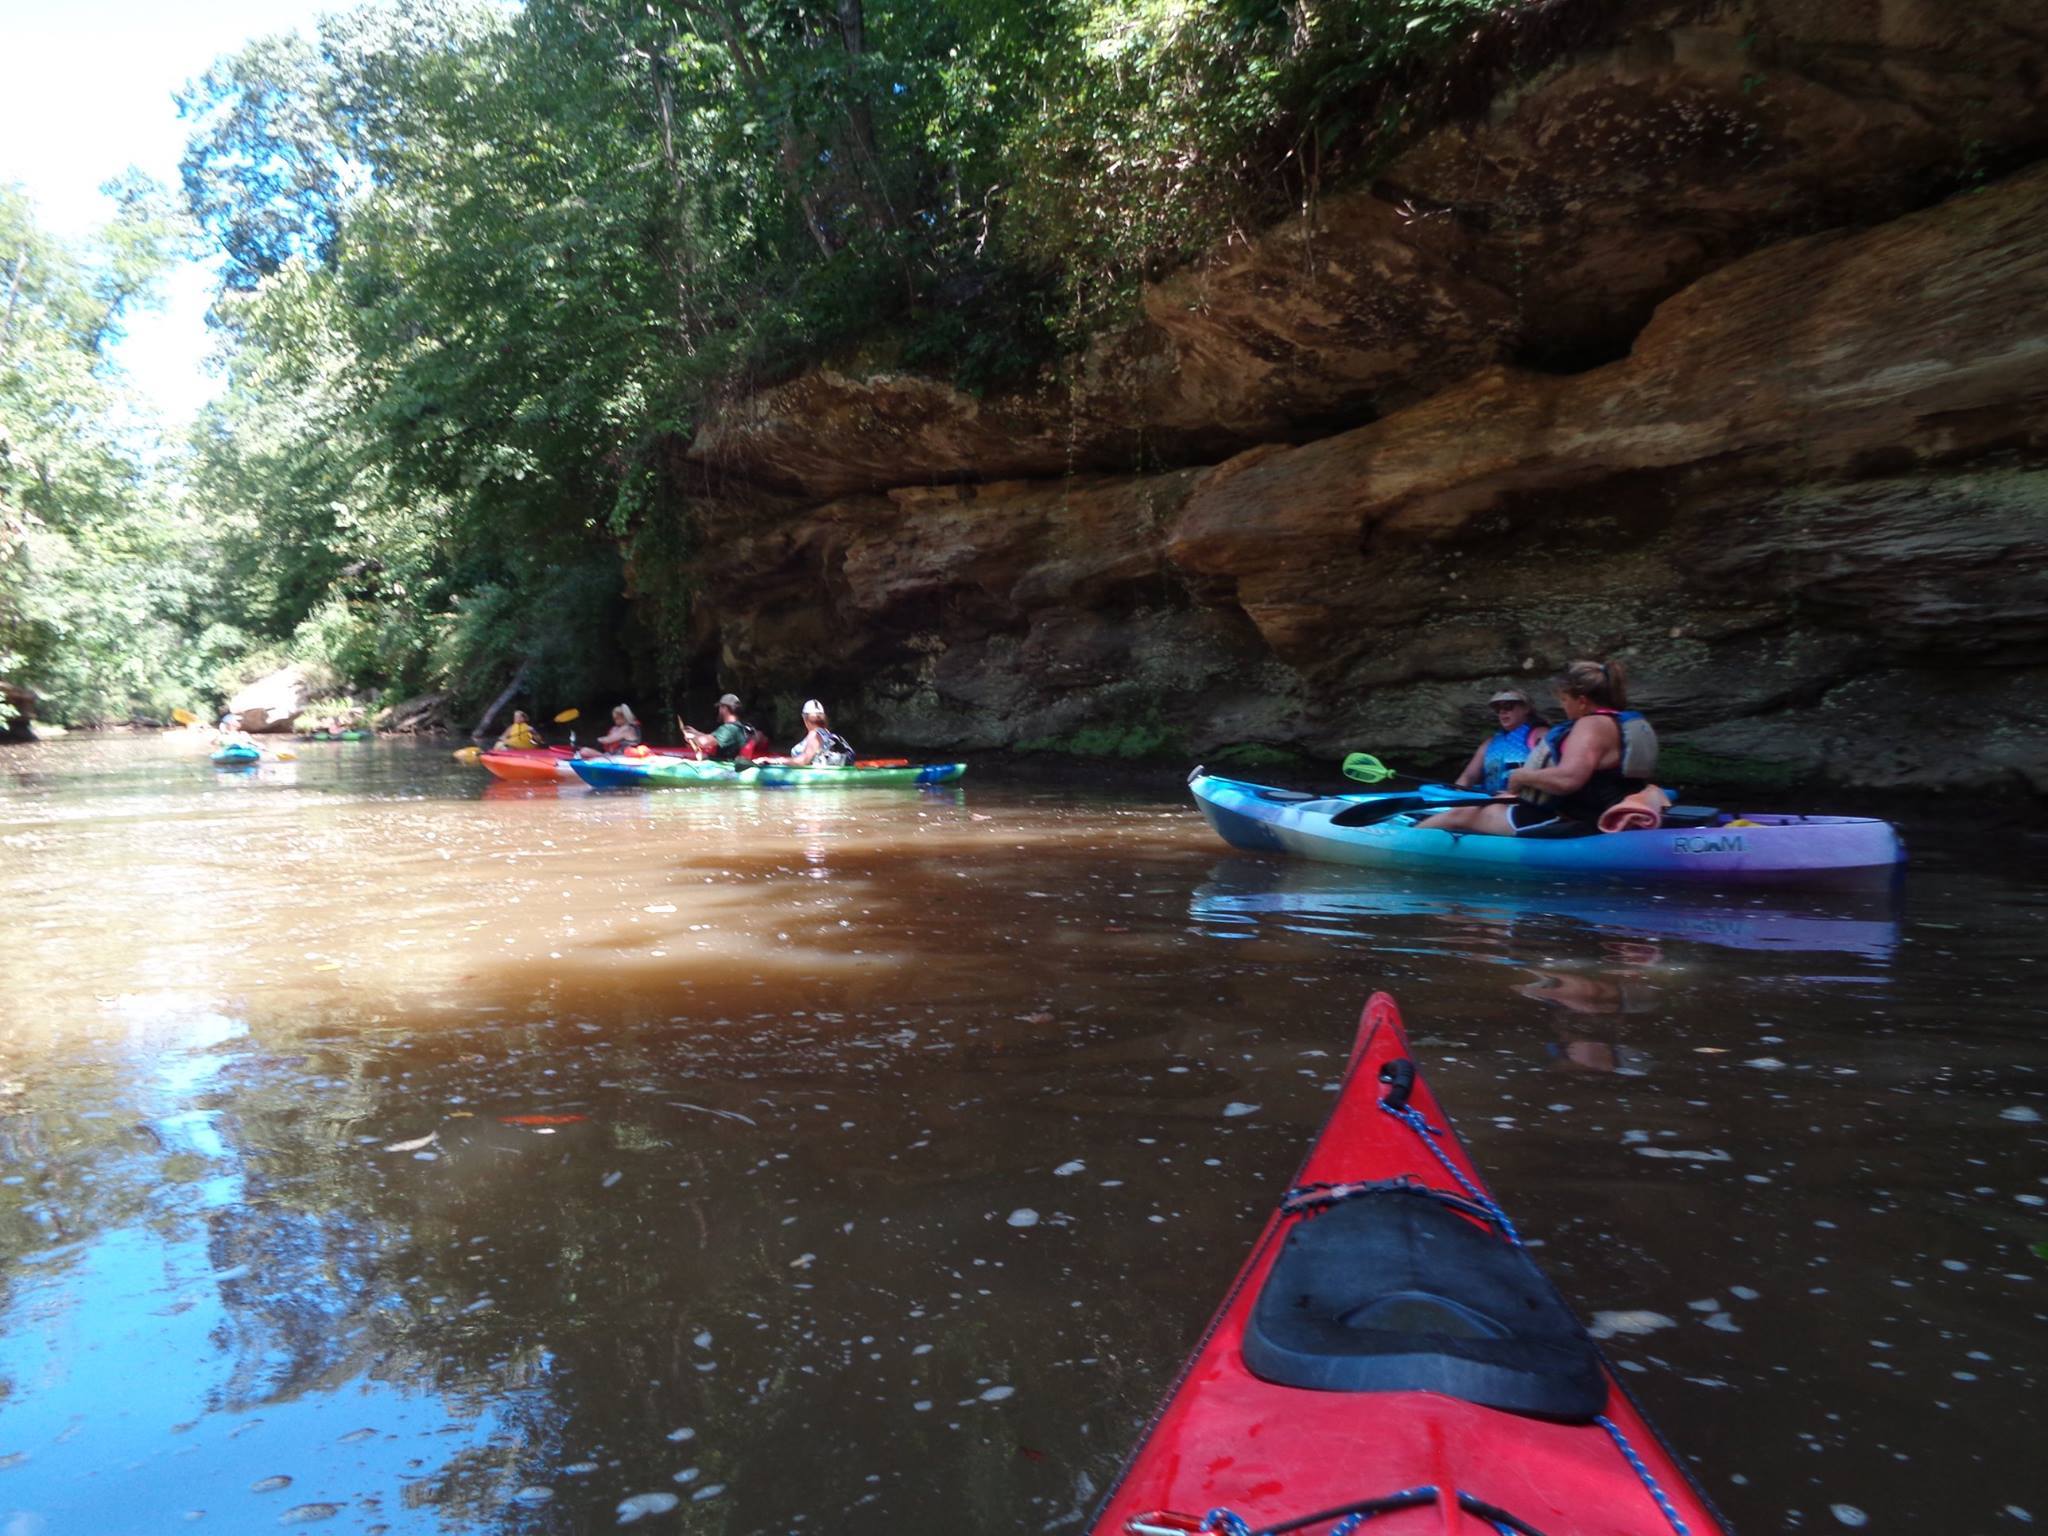 group kayaking on a river